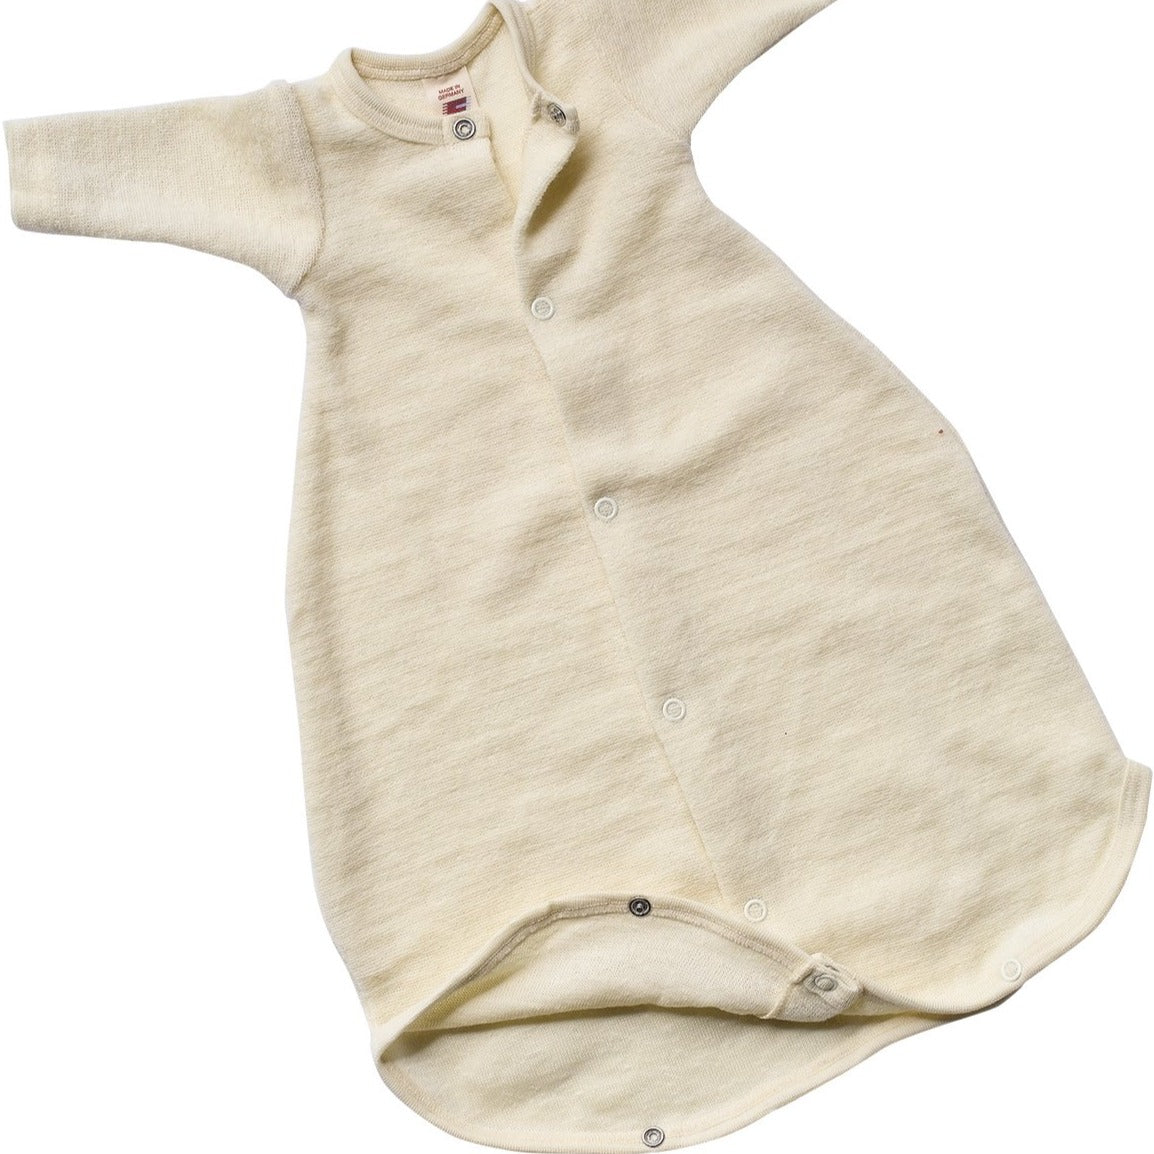 Engel Premature Baby Sleep Sack with Long Sleeves and Snap opening on the Botom, Wool Terry